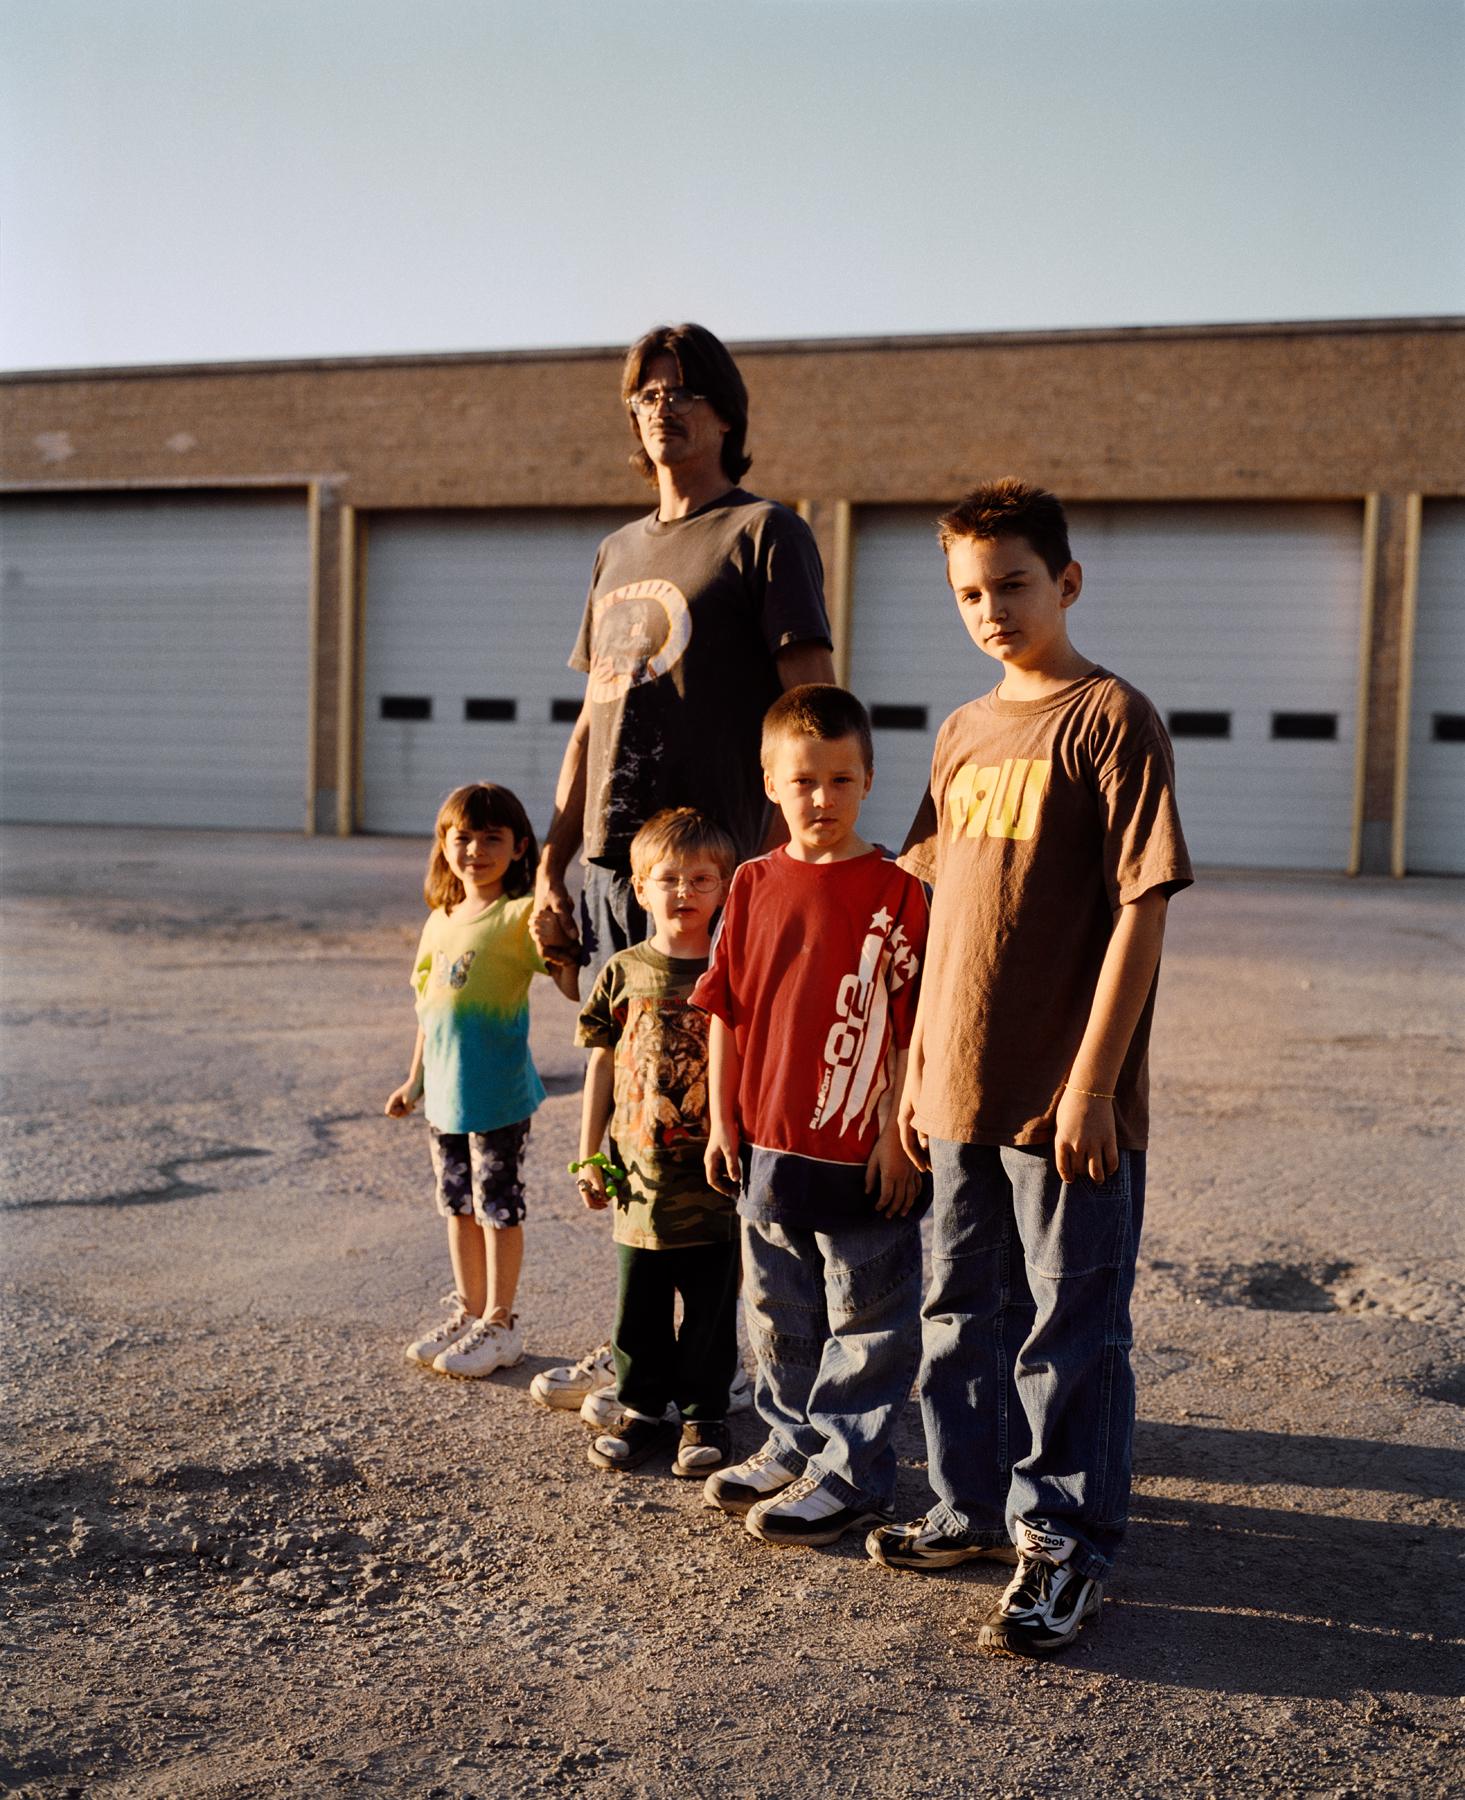 Gregory Halpern Color Photograph - Omaha Sketchbook: Patrick with his Kids, Omaha, NE - Contemporary Photography